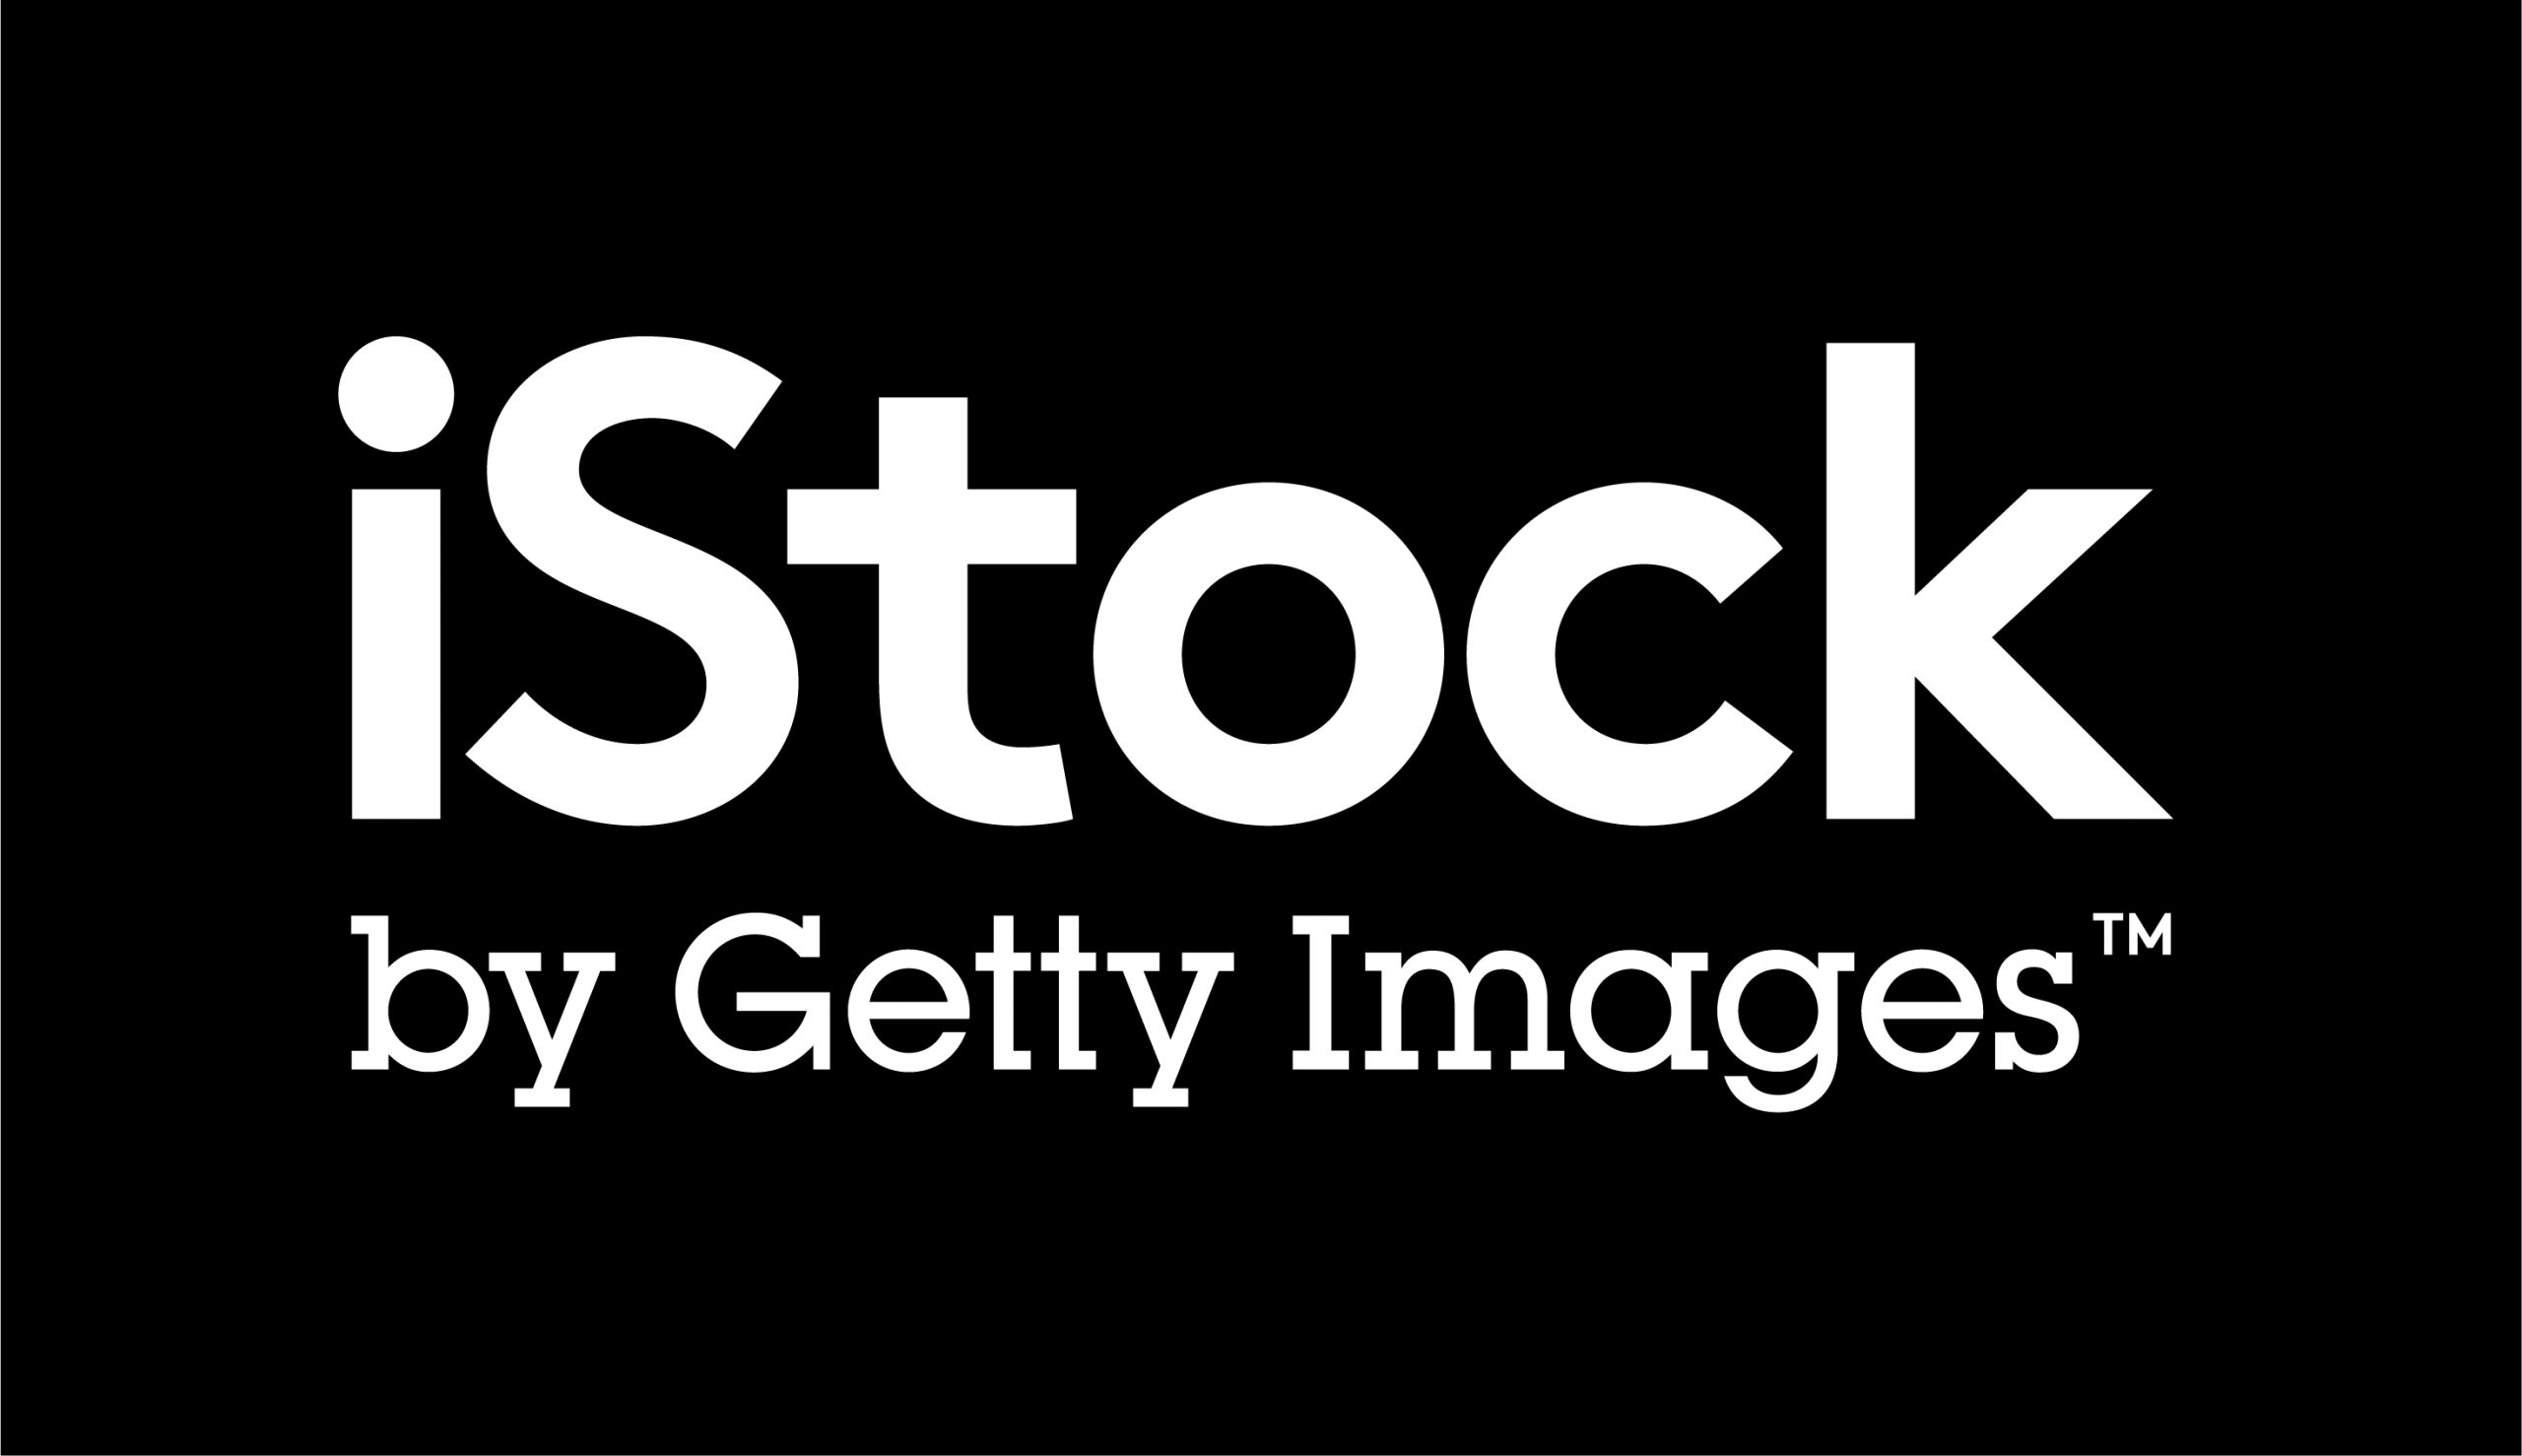 Getting started as an iStock contributor